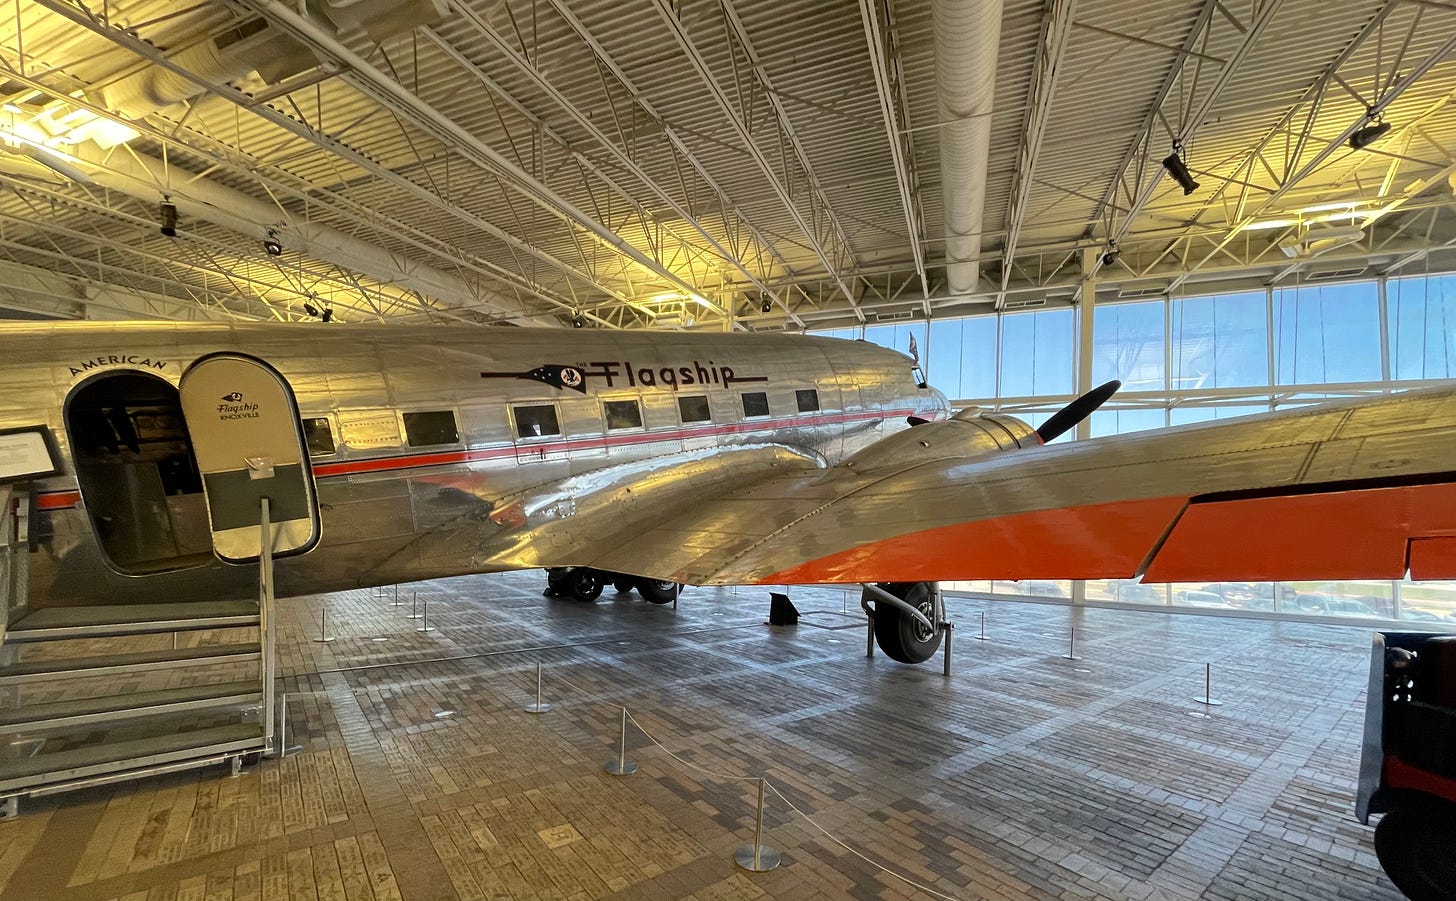 Original DC-3 at American Airlines’ C.R. Smith Museum near to the DFW Airport